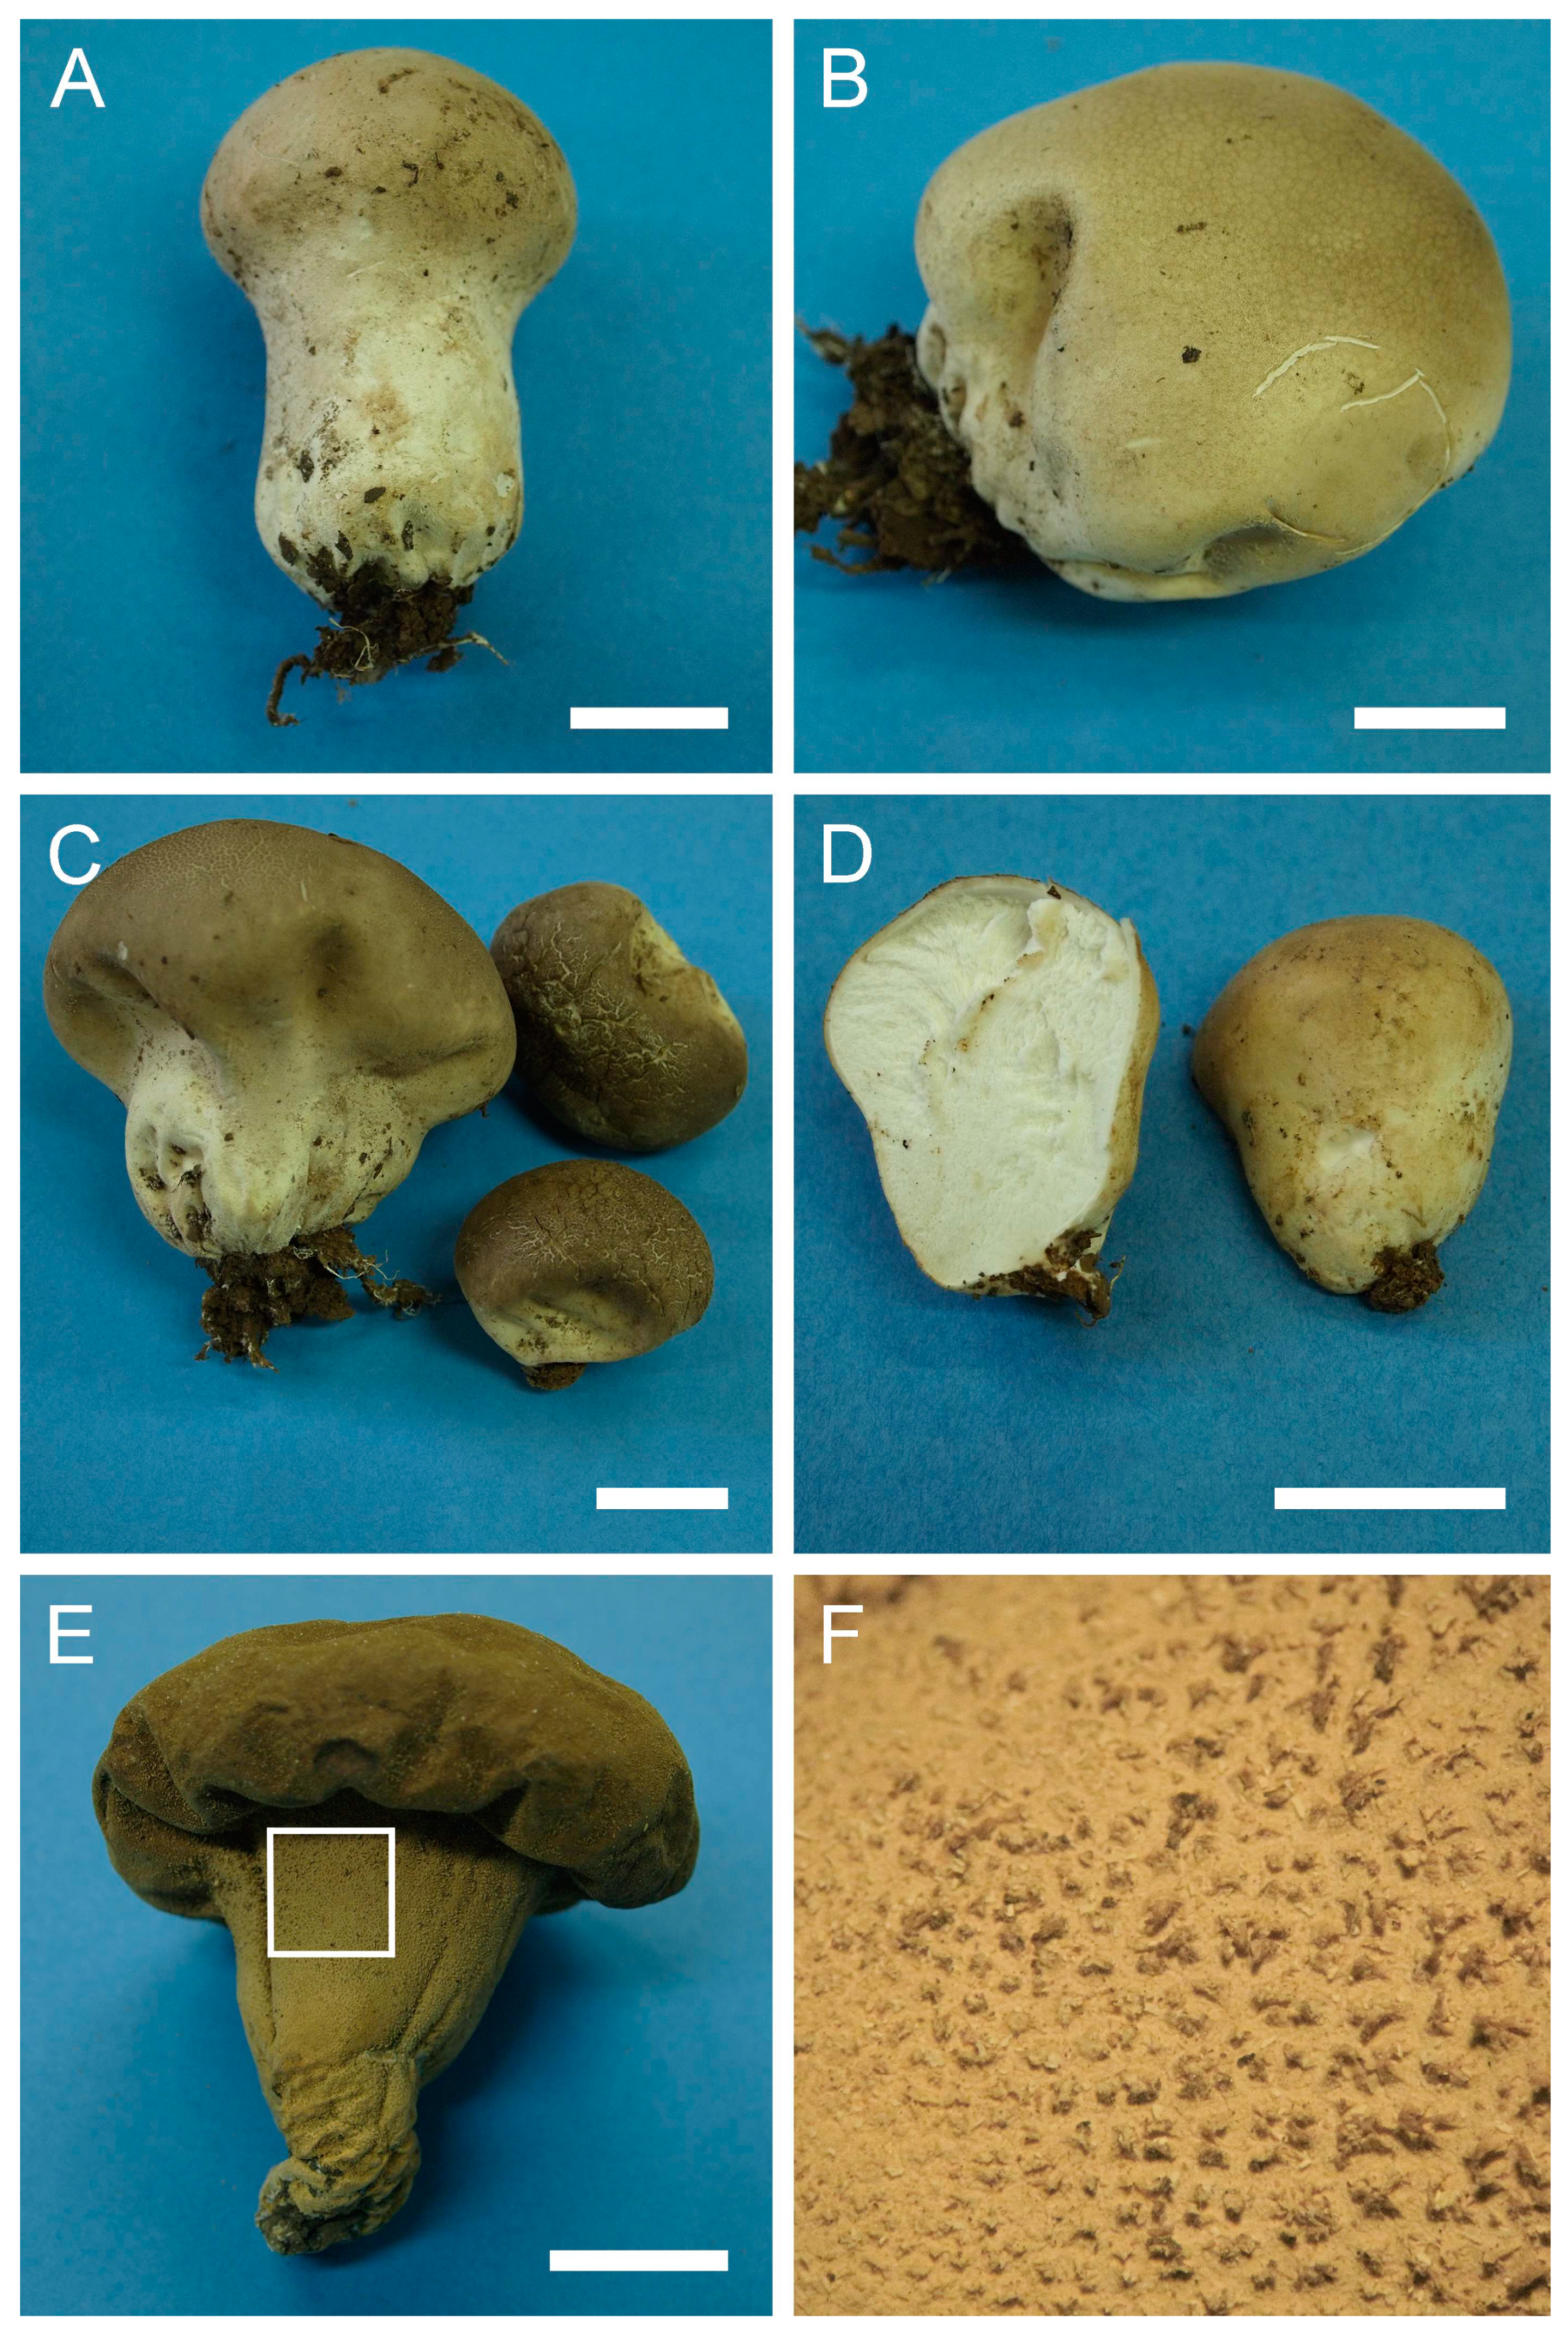 JoF | Free Full-Text | Species Diversity of Lycoperdaceae (Agaricales) in  Israel, with Some Insights into the Phylogenetic Structure of the Family